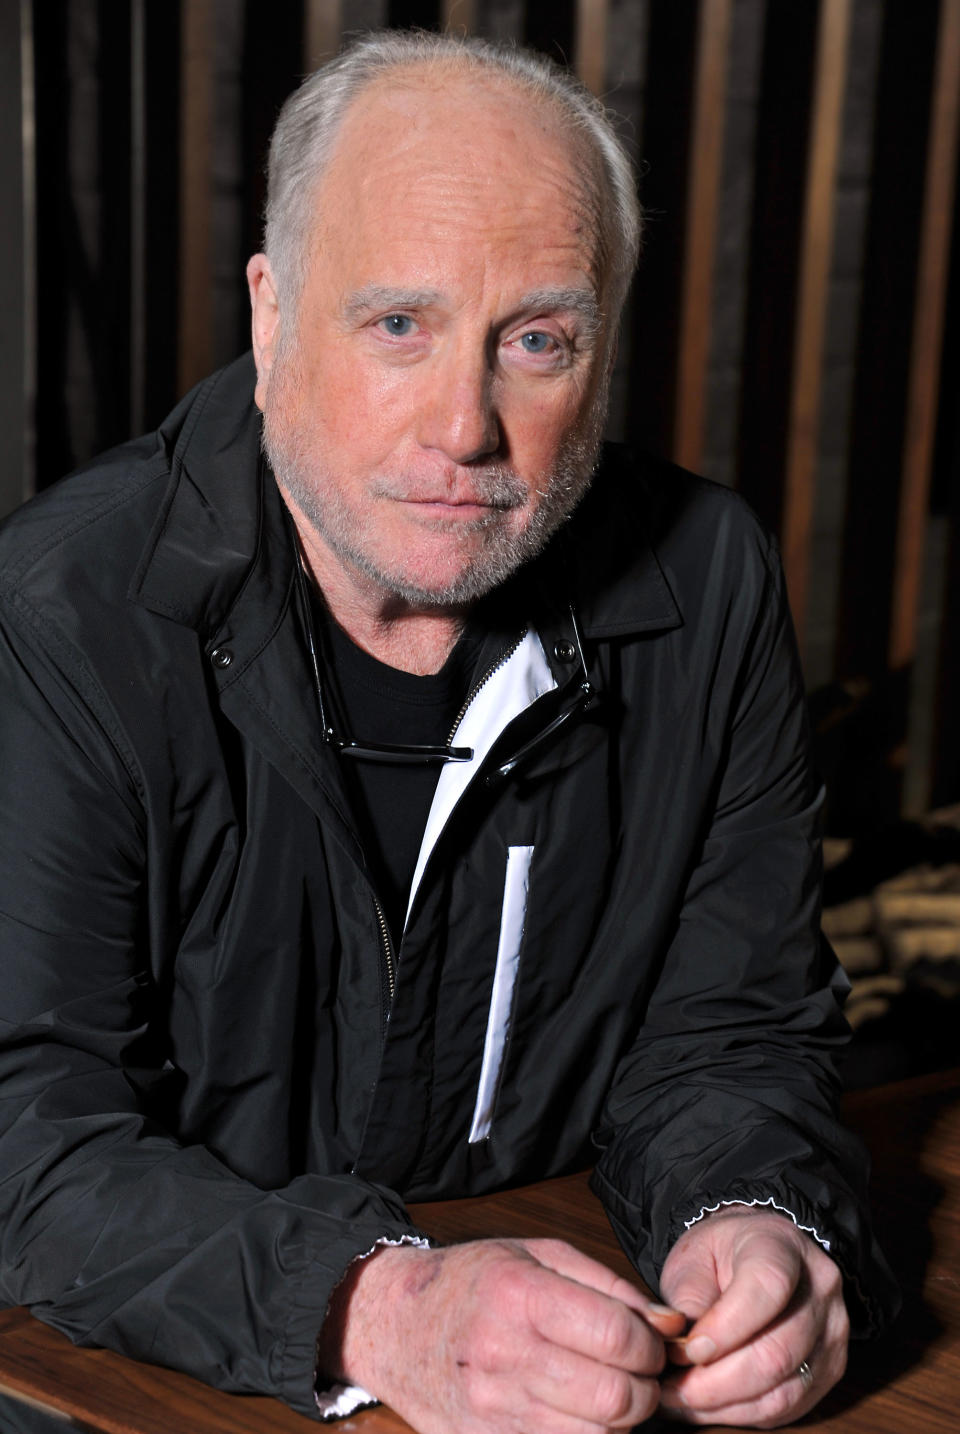 Richard Dreyfuss poses for a photo at The Roosevelt Hotel, on Friday, April 11, 2014 in Los Angeles. (Photo by Katy Winn/Invision/AP)